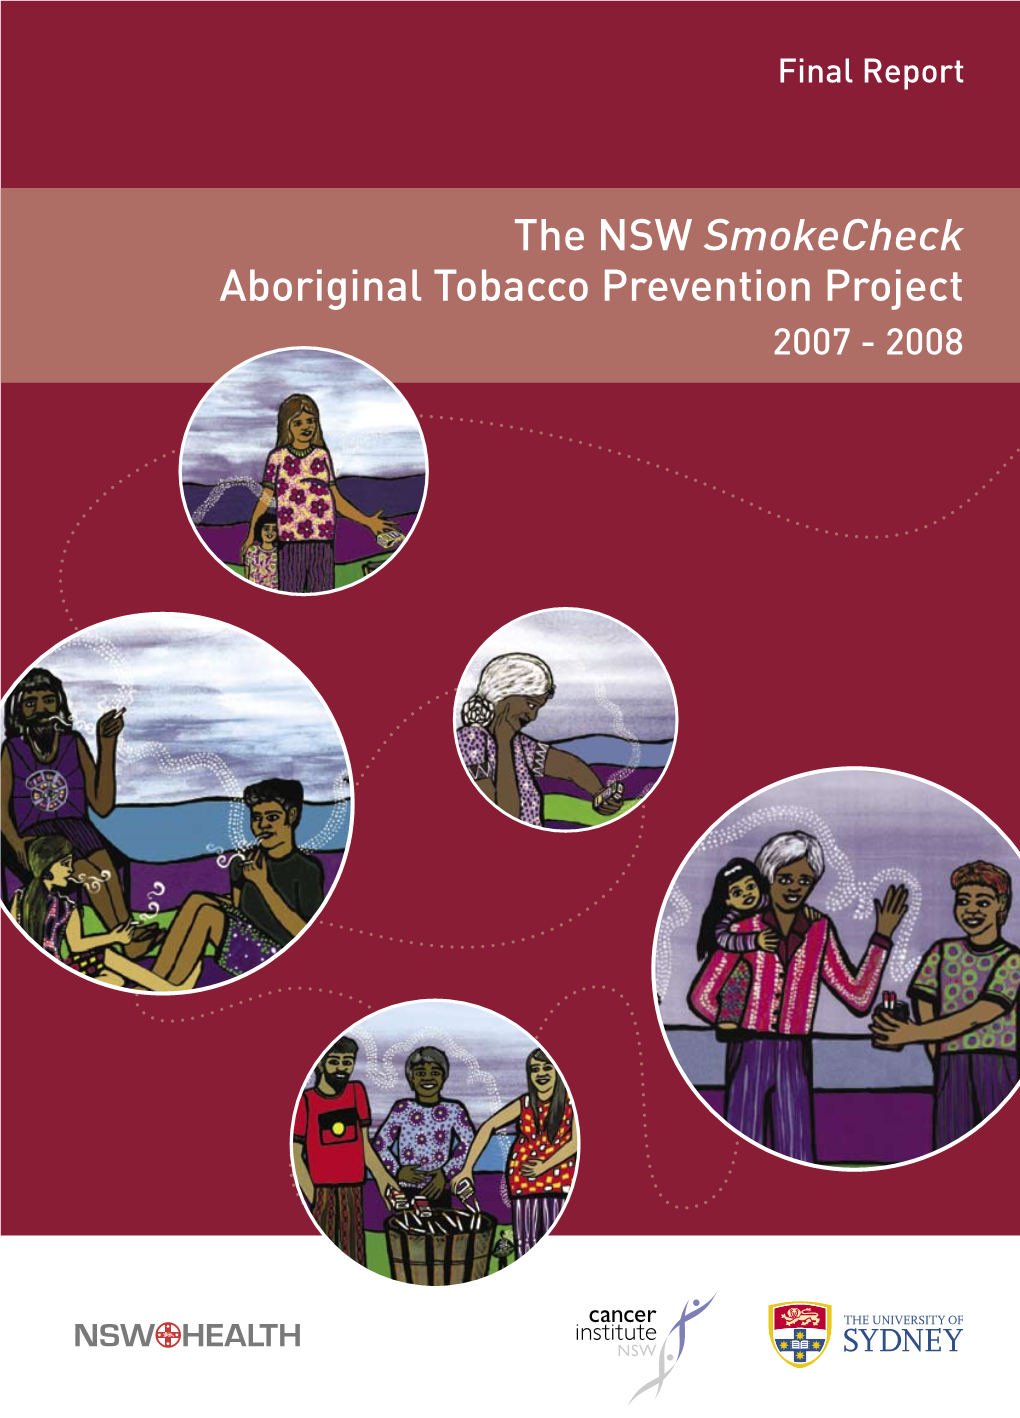 Final Report of the NSW Smokecheck Aboriginal Tobacco Prevention Project 2007-2008